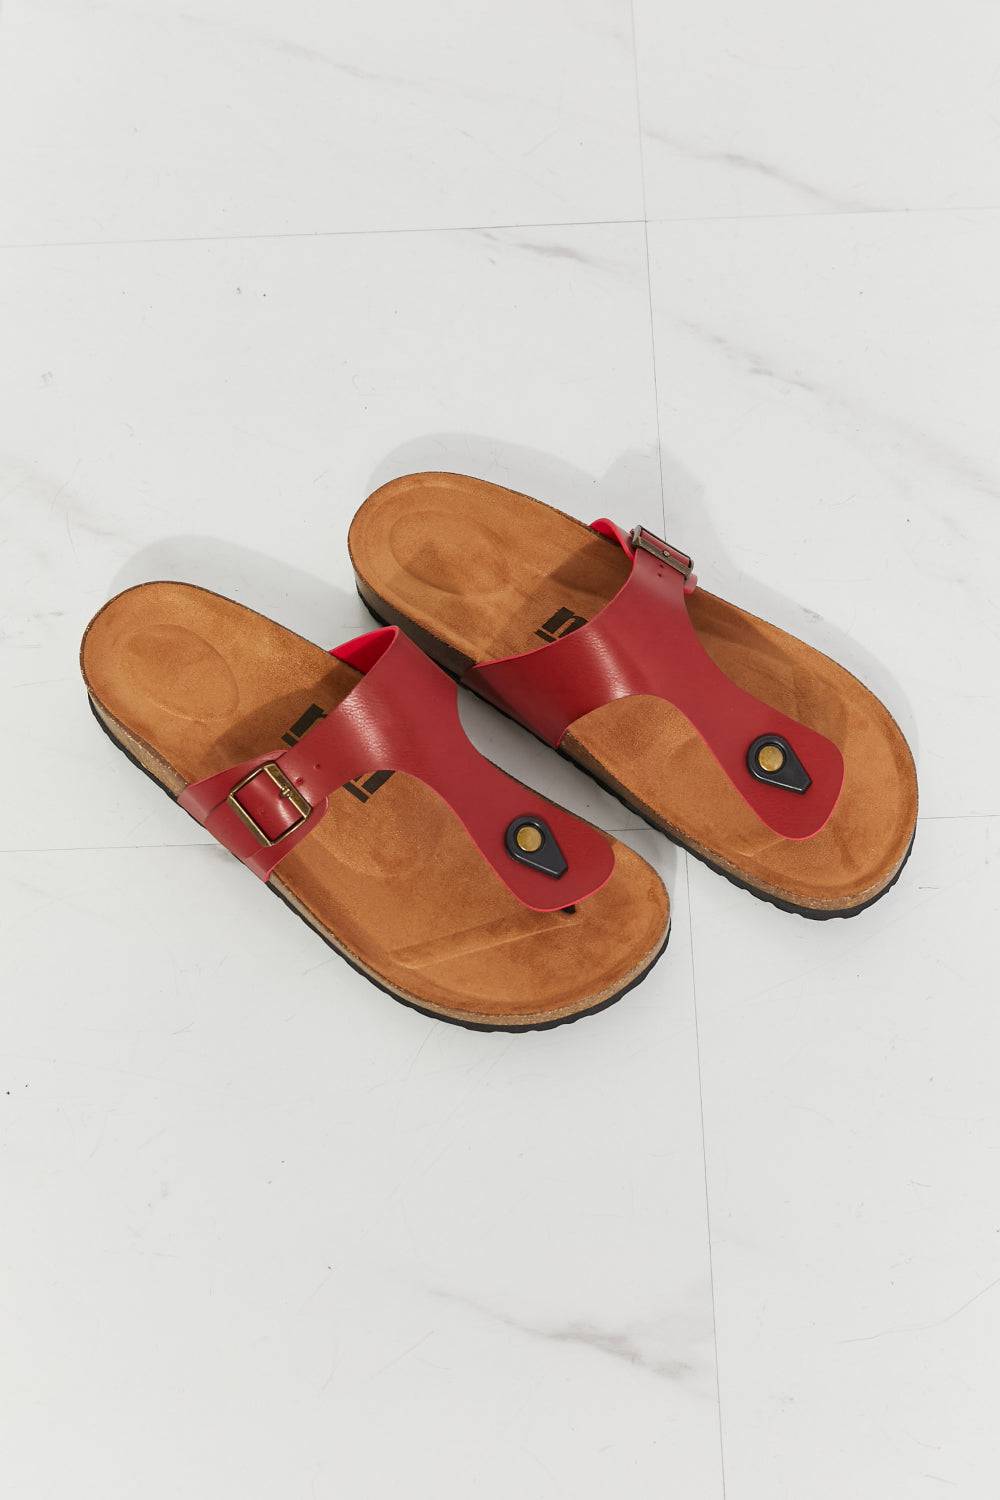 Indulge in Pure Bliss with the MMShoes Drift Away T-Strap Flip-Flop - Experience Ultimate Comfort and Elegance While Walking Hand-in-Hand With Your Lover. - Guy Christopher